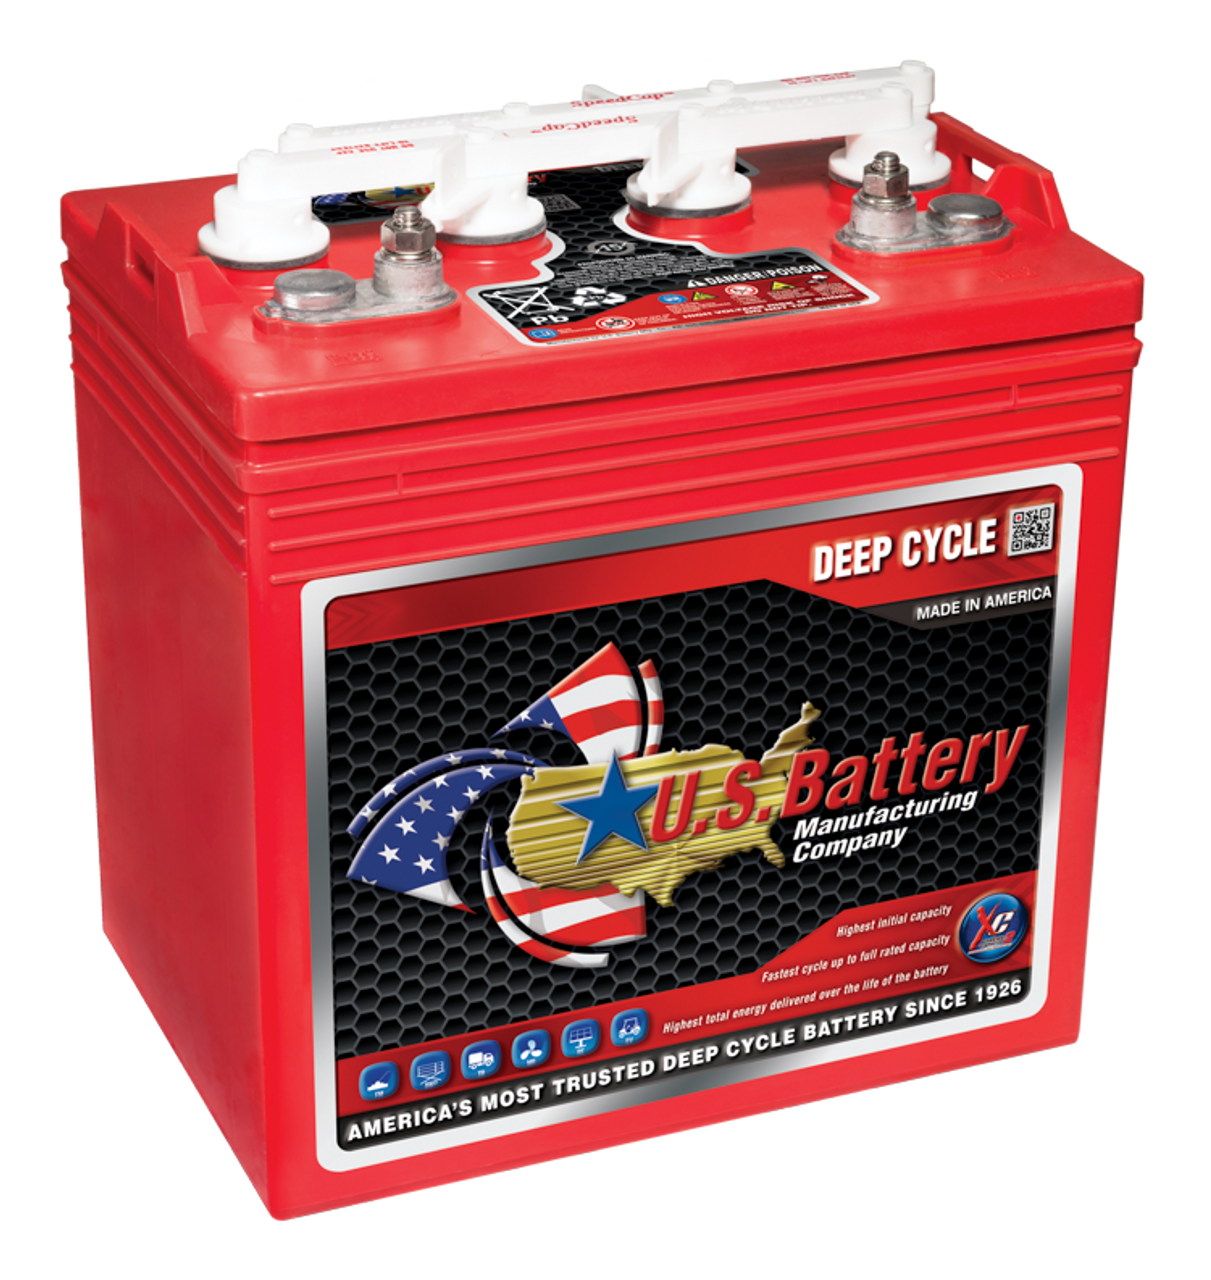 Group GC8 8V US8VGCHC U.S Battery Deep Cycle Battery